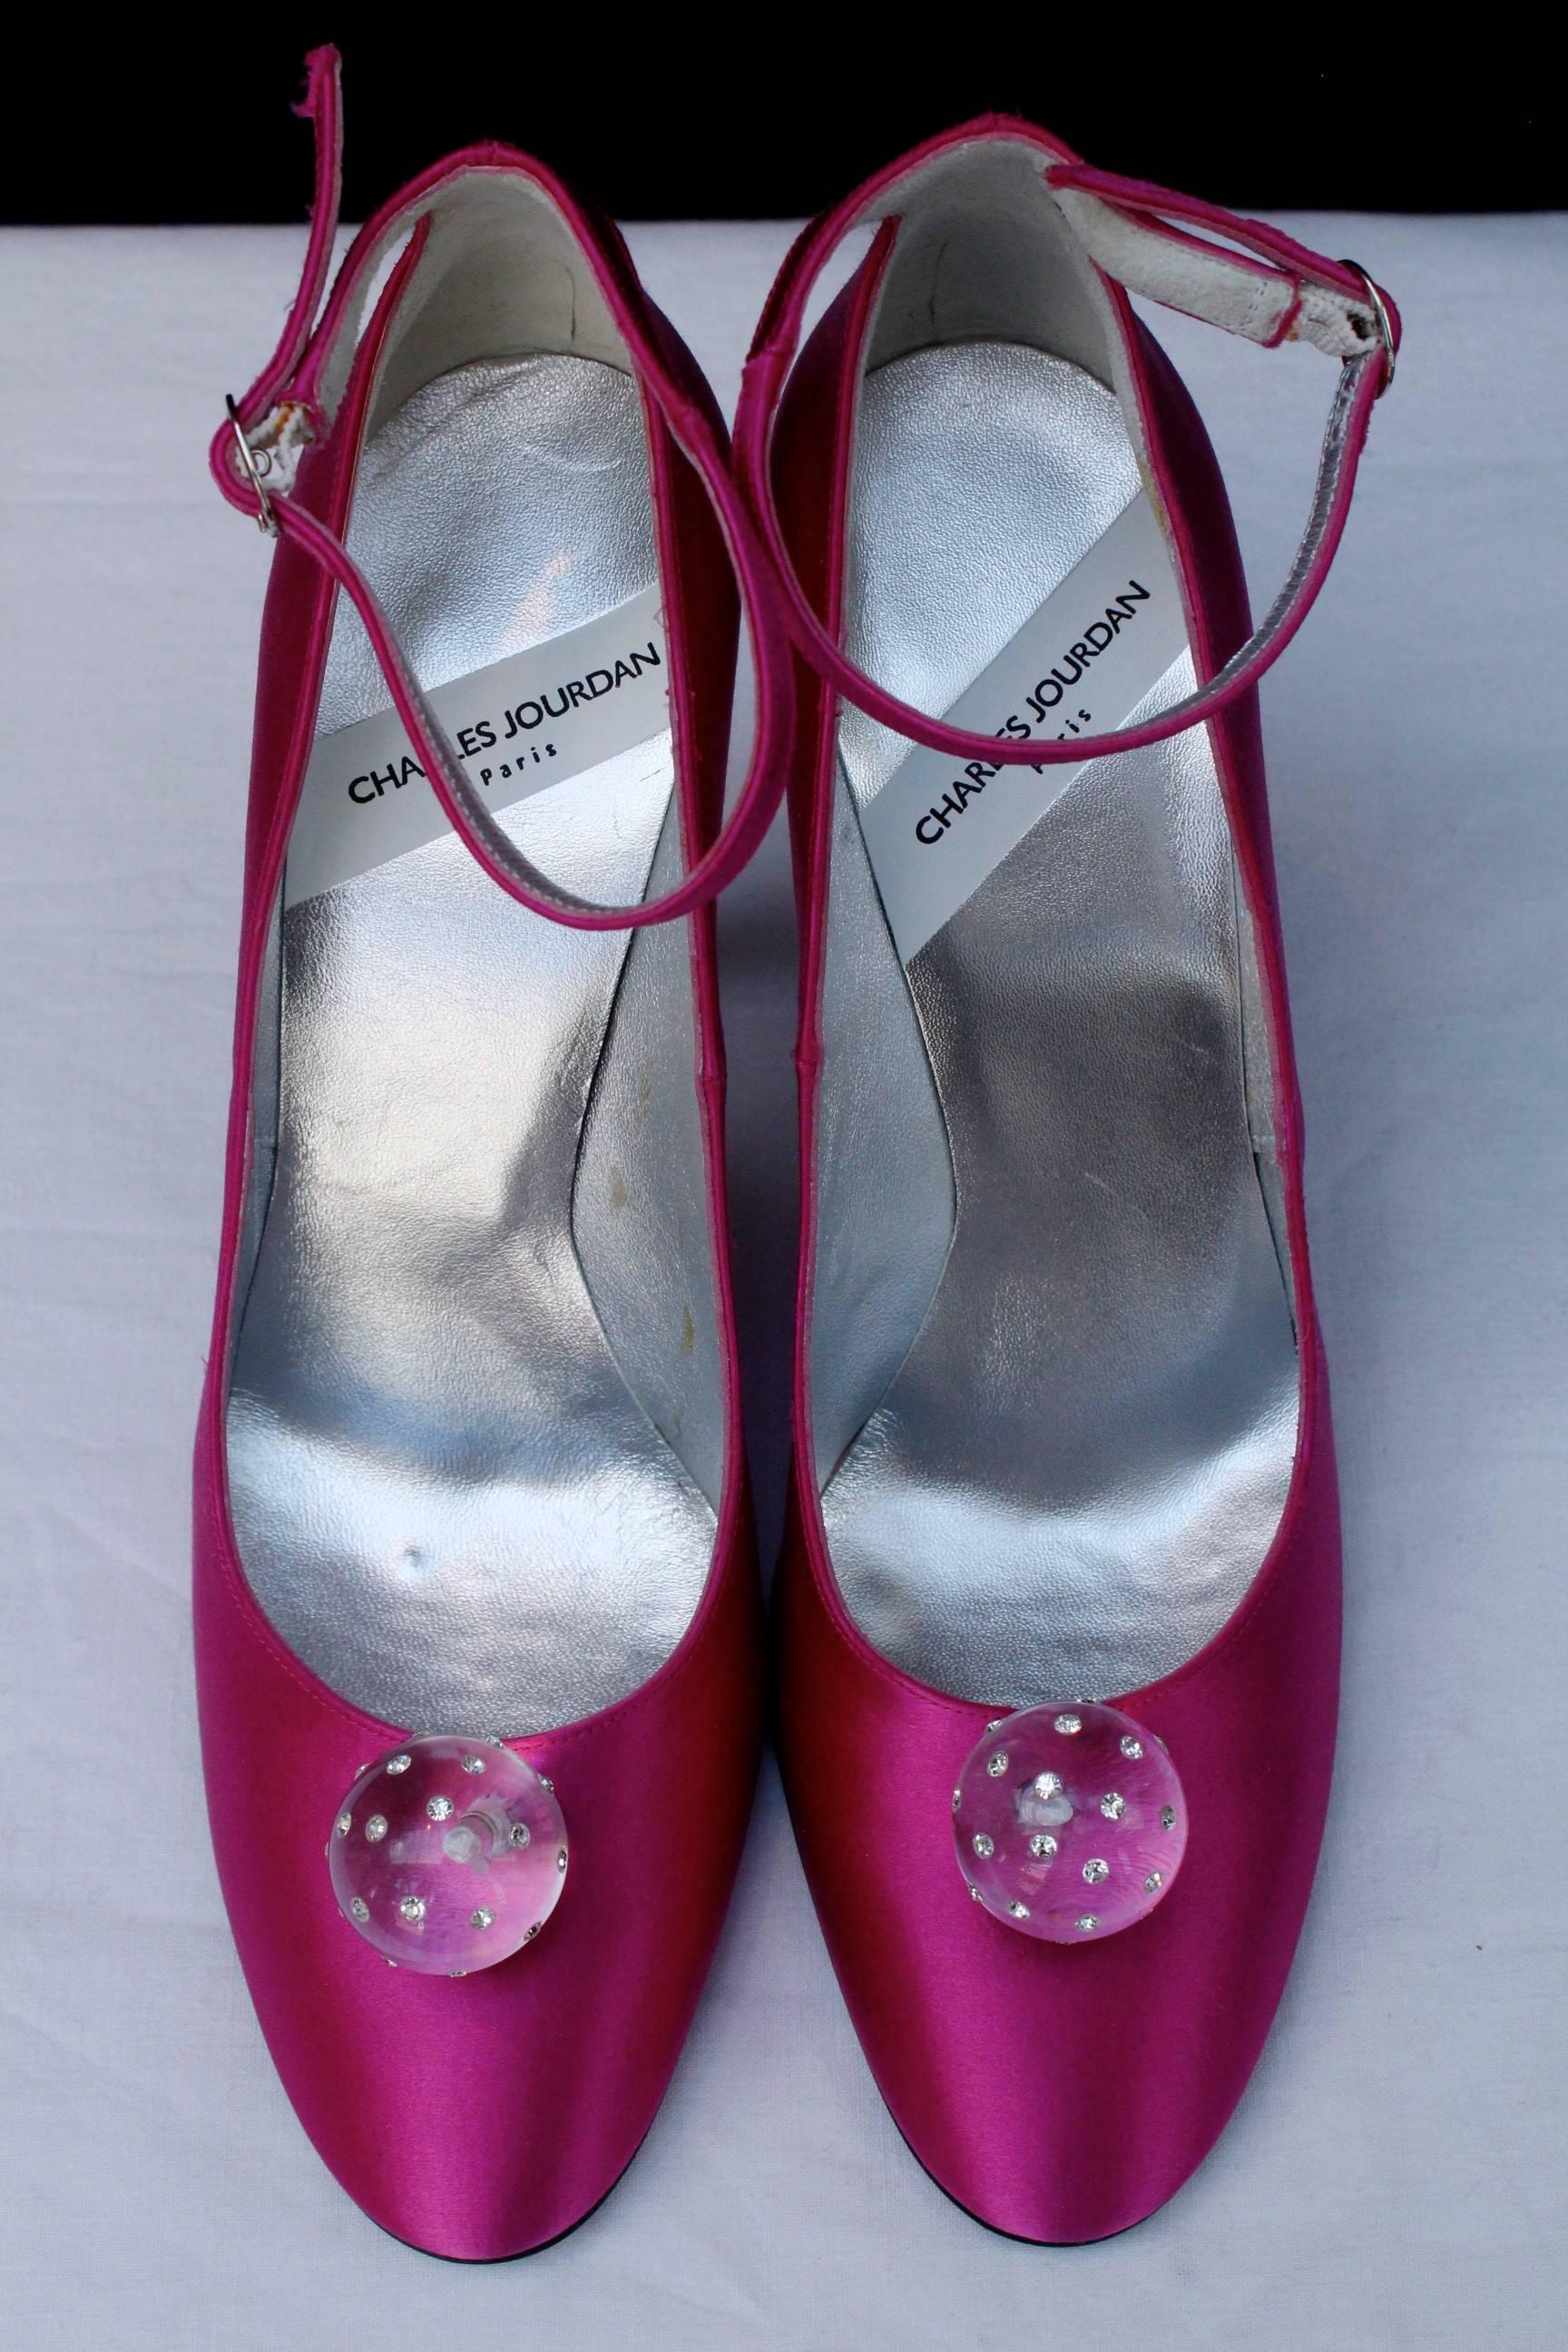 Women's Charles Jourdan fuchsia satin pumps decorated with a transparent sphere.